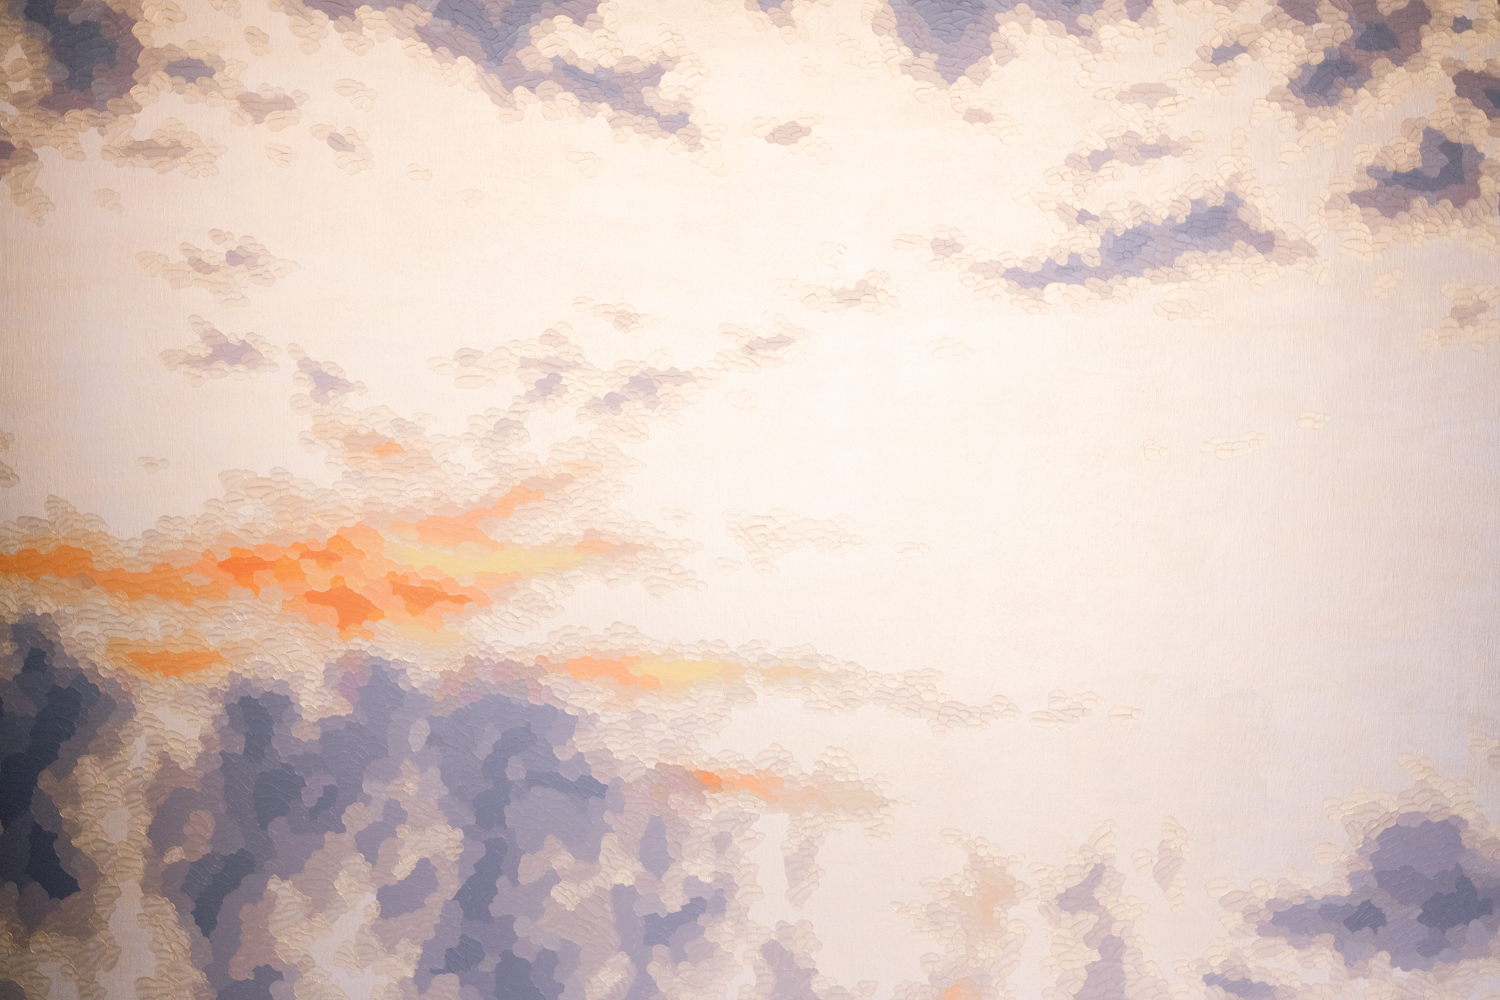 A painting depicts a colorful sky.